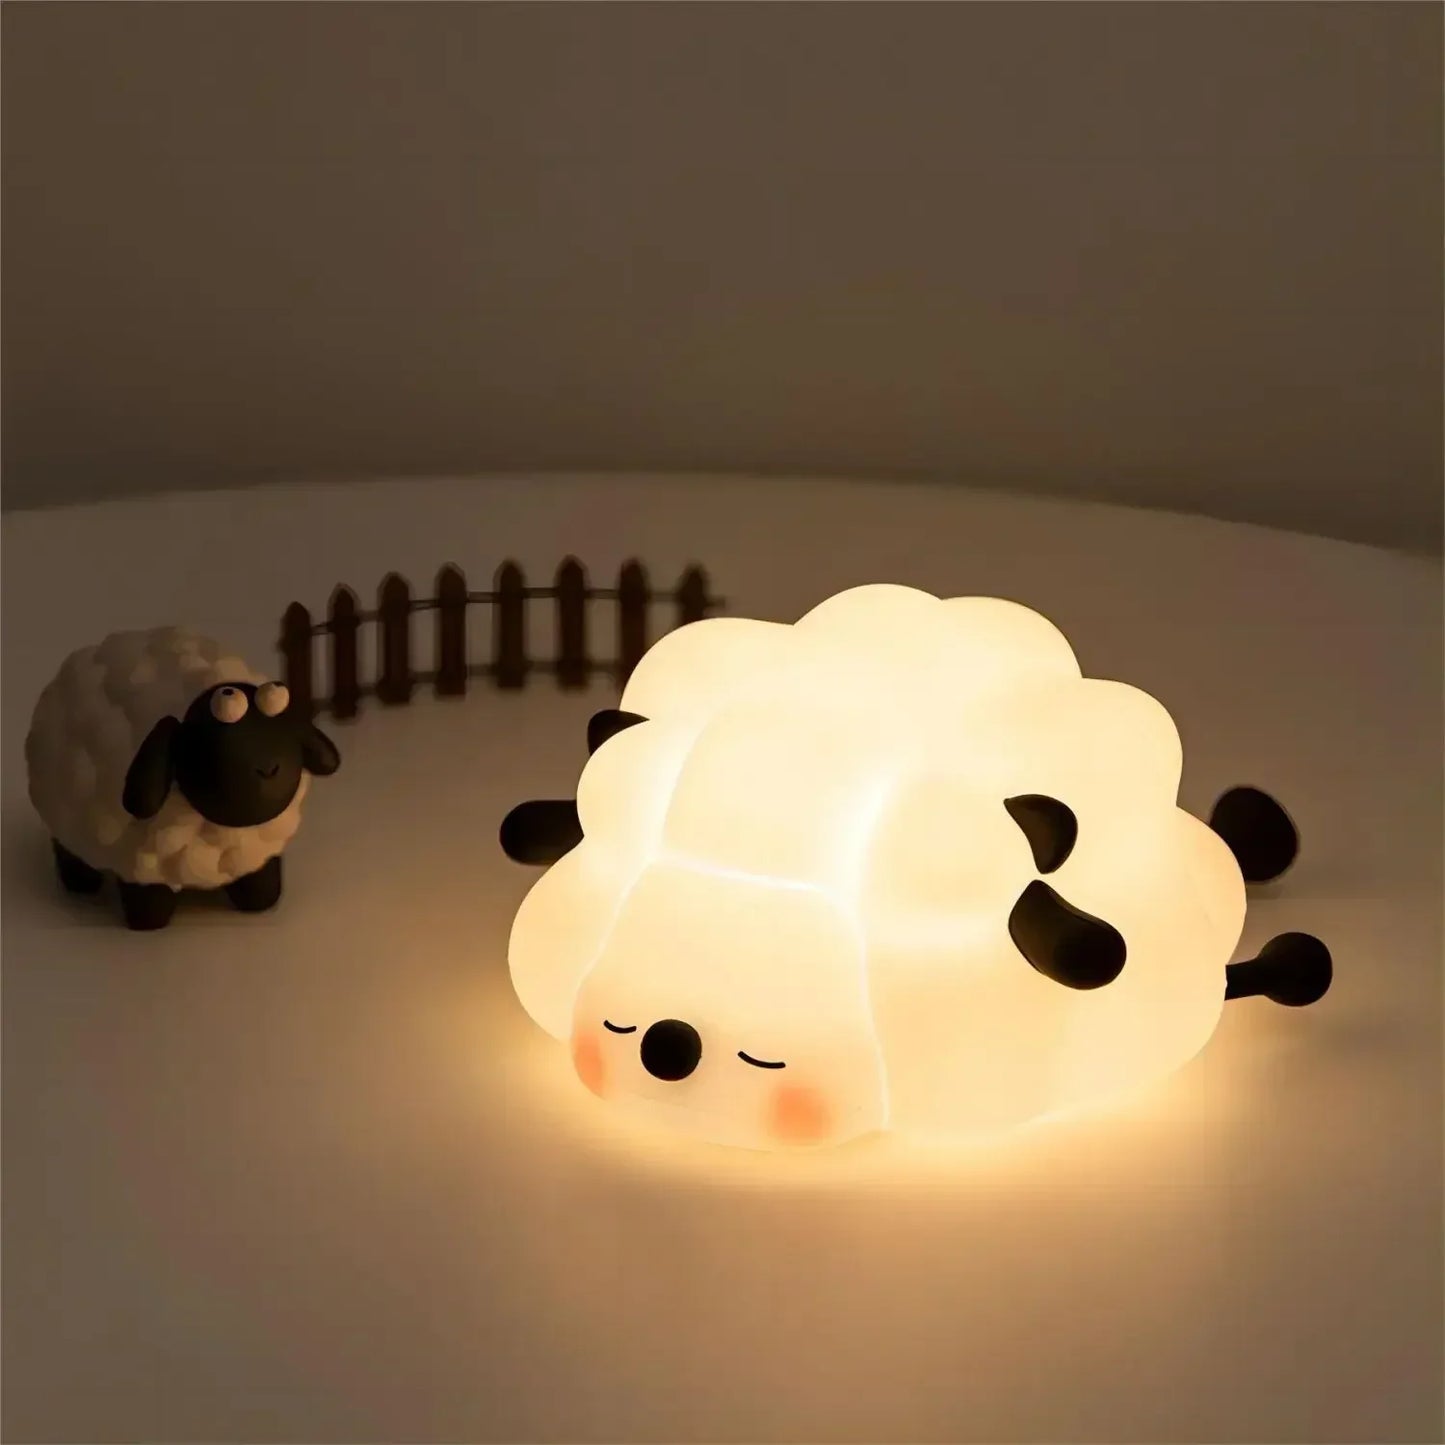 Portable LED Night Light for Kids - Rechargeable, Touch Sensor, 3 Brightness Levels - Perfect for Bedroom Decor